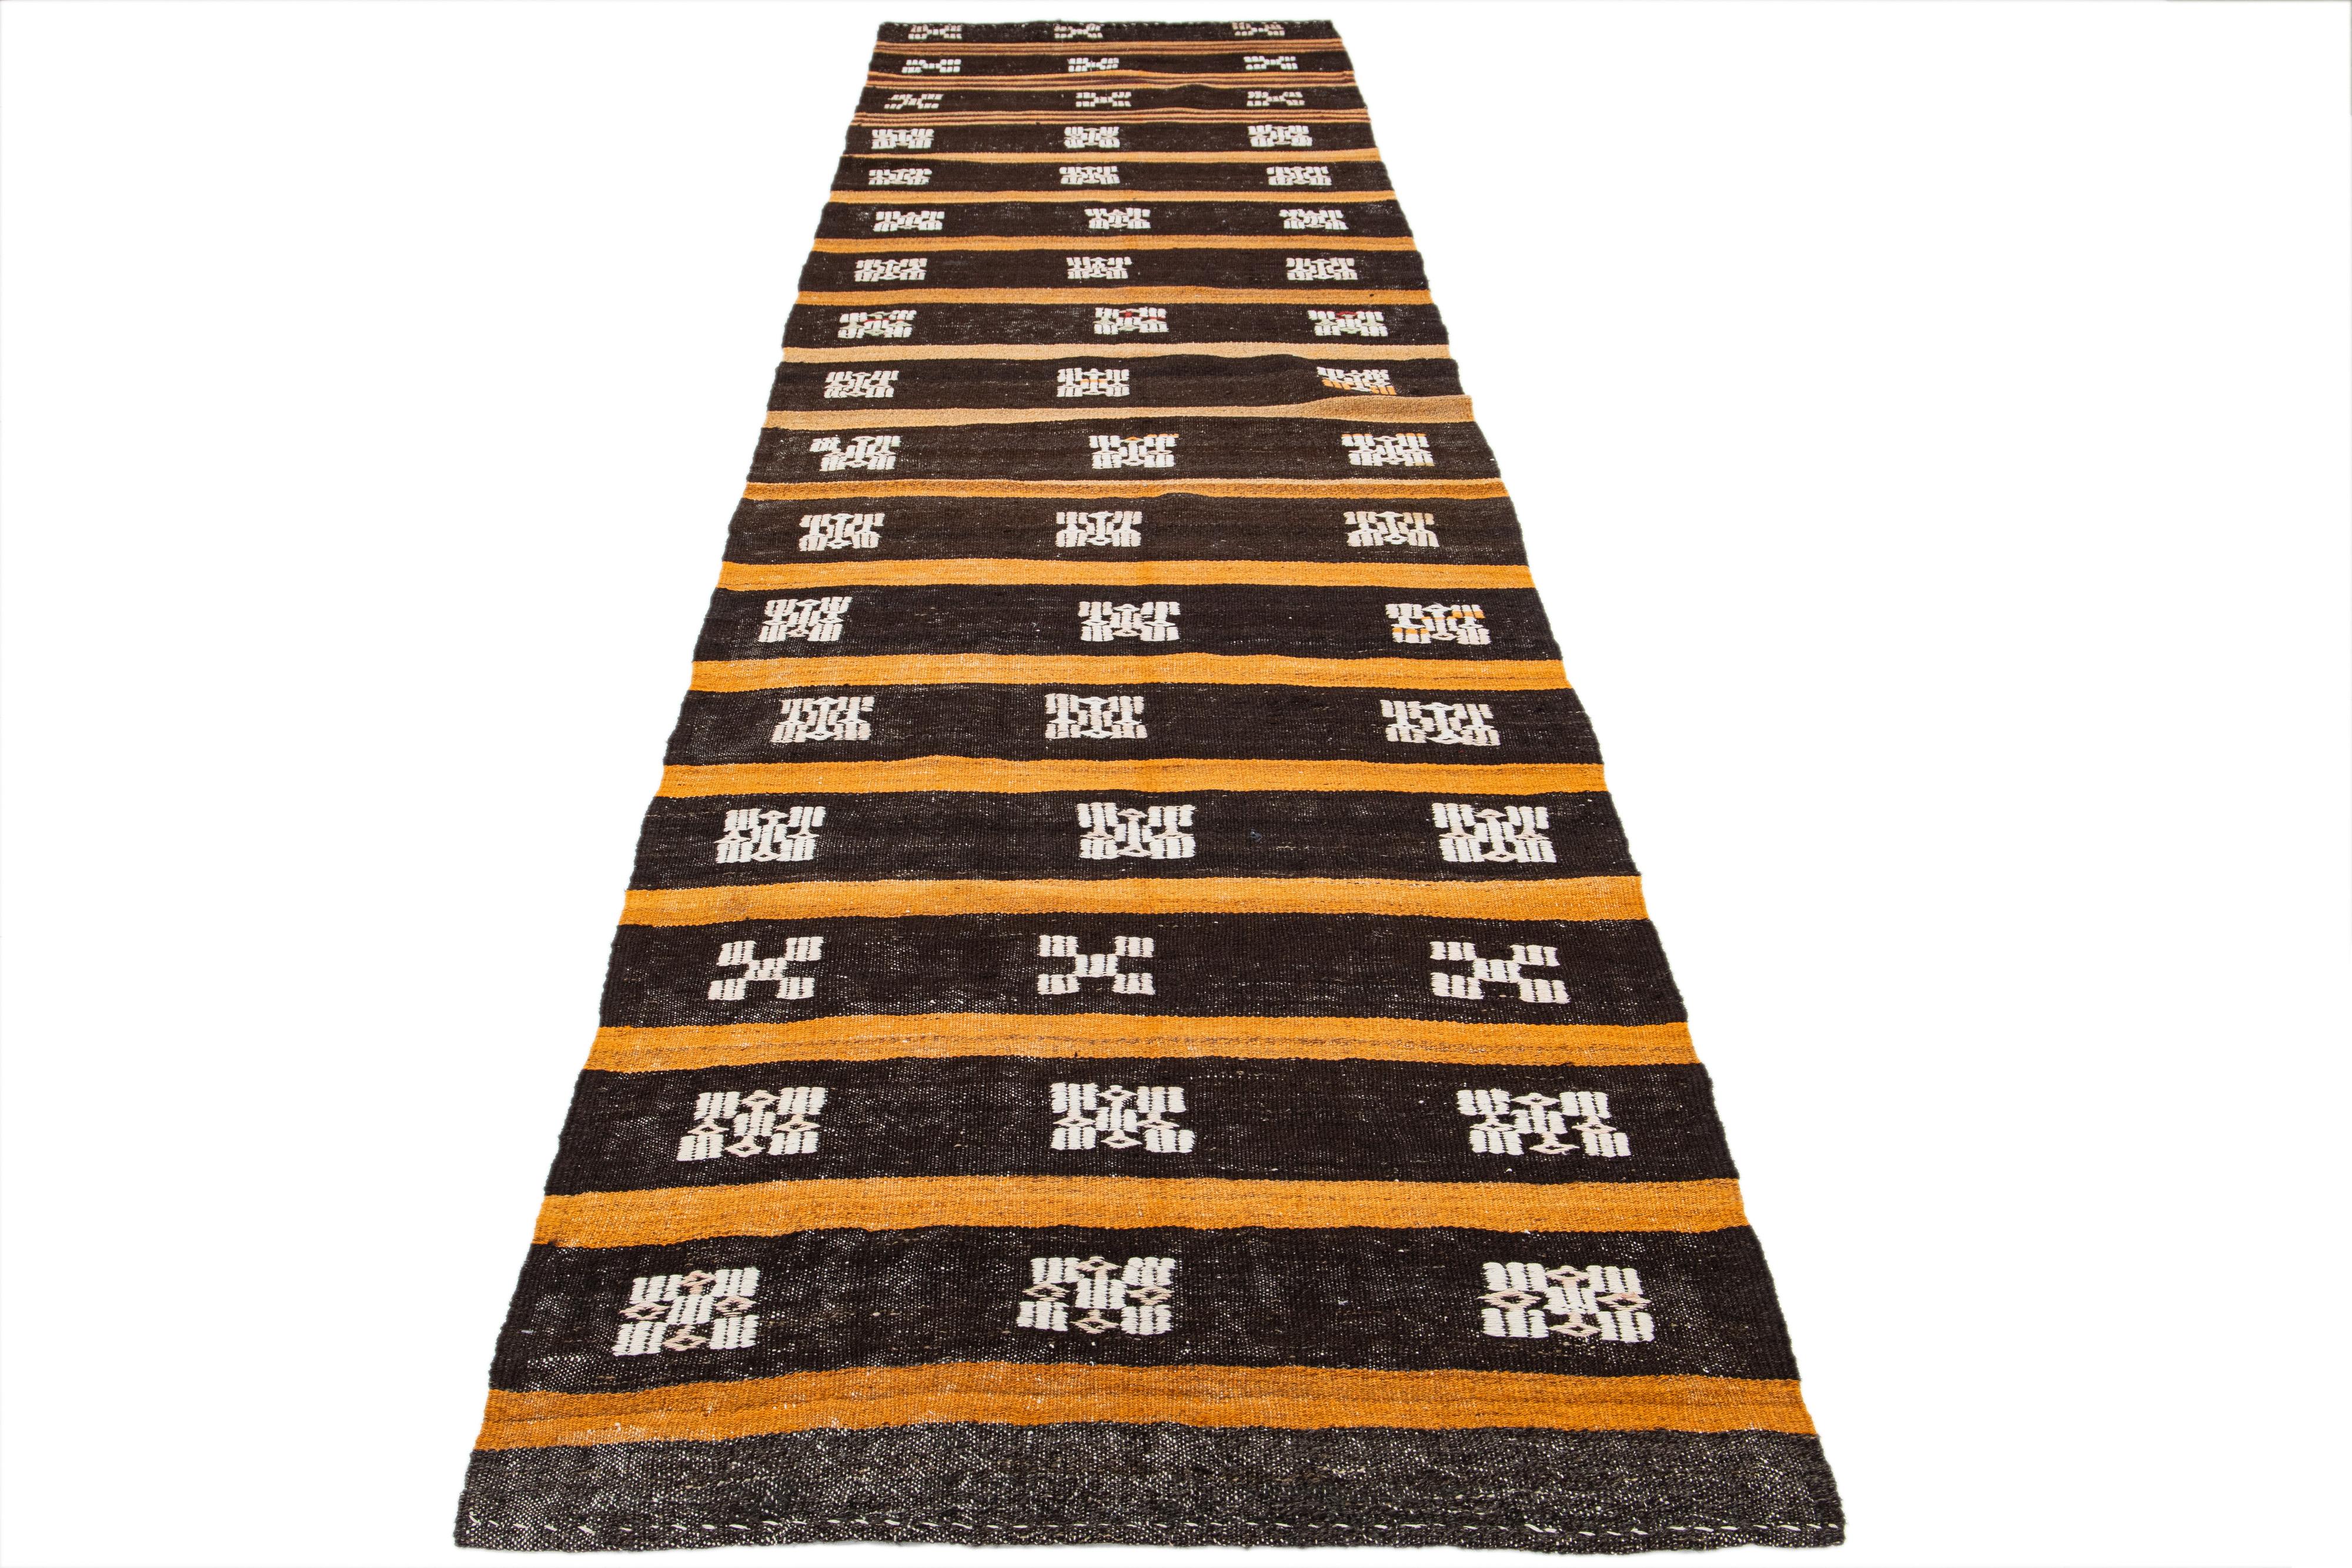 Handmade wool kilim rug with a brown color field and orange striped accent. Features an all-over ivory design.

This rug measures 3'6